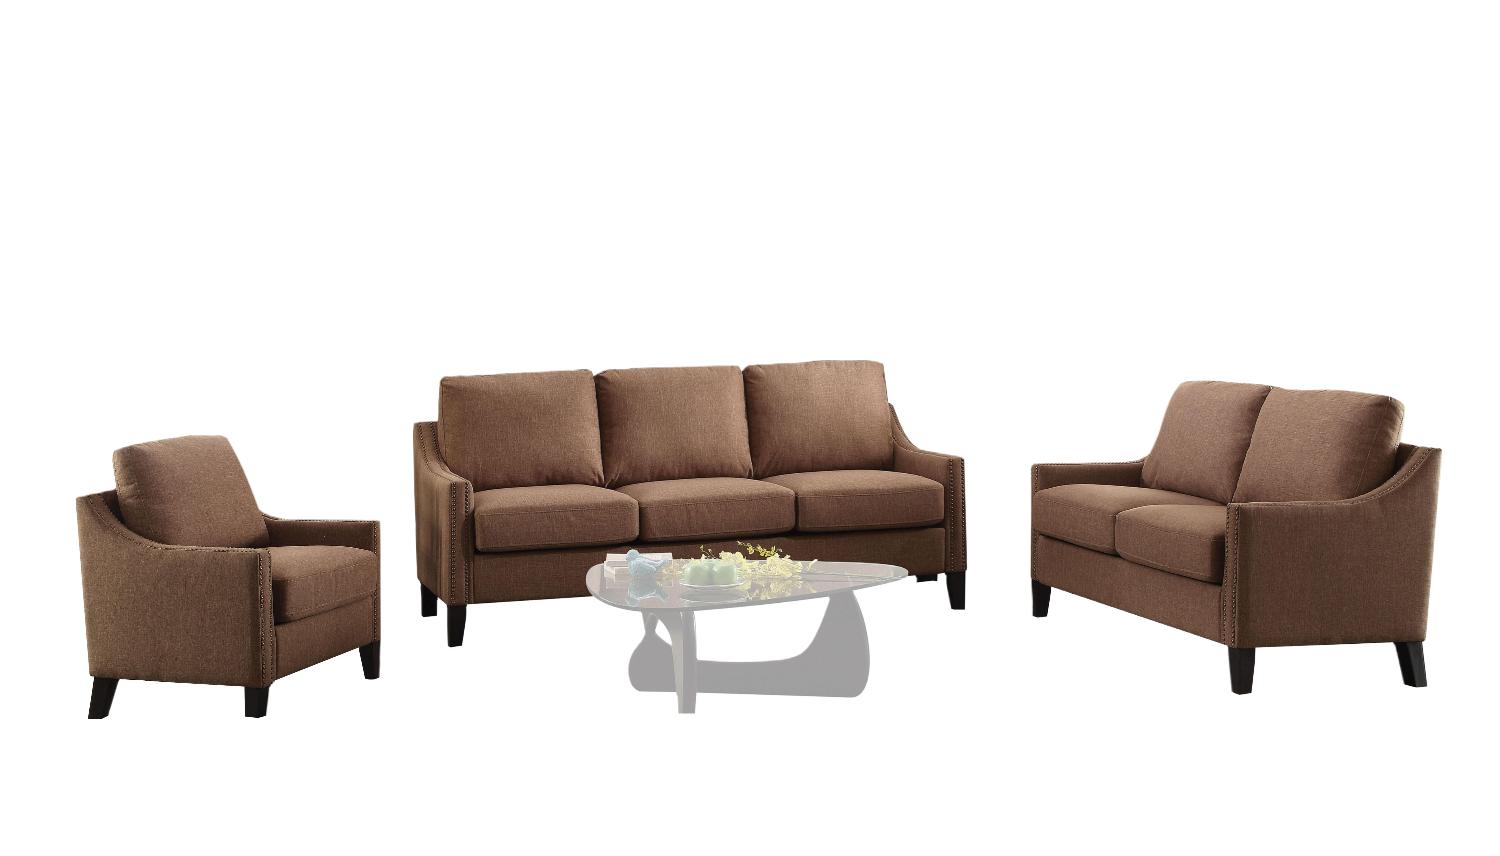 

    
Contemporary Brown Sofa + Loveseat + Chair by Acme Zapata 53765-3pcs
